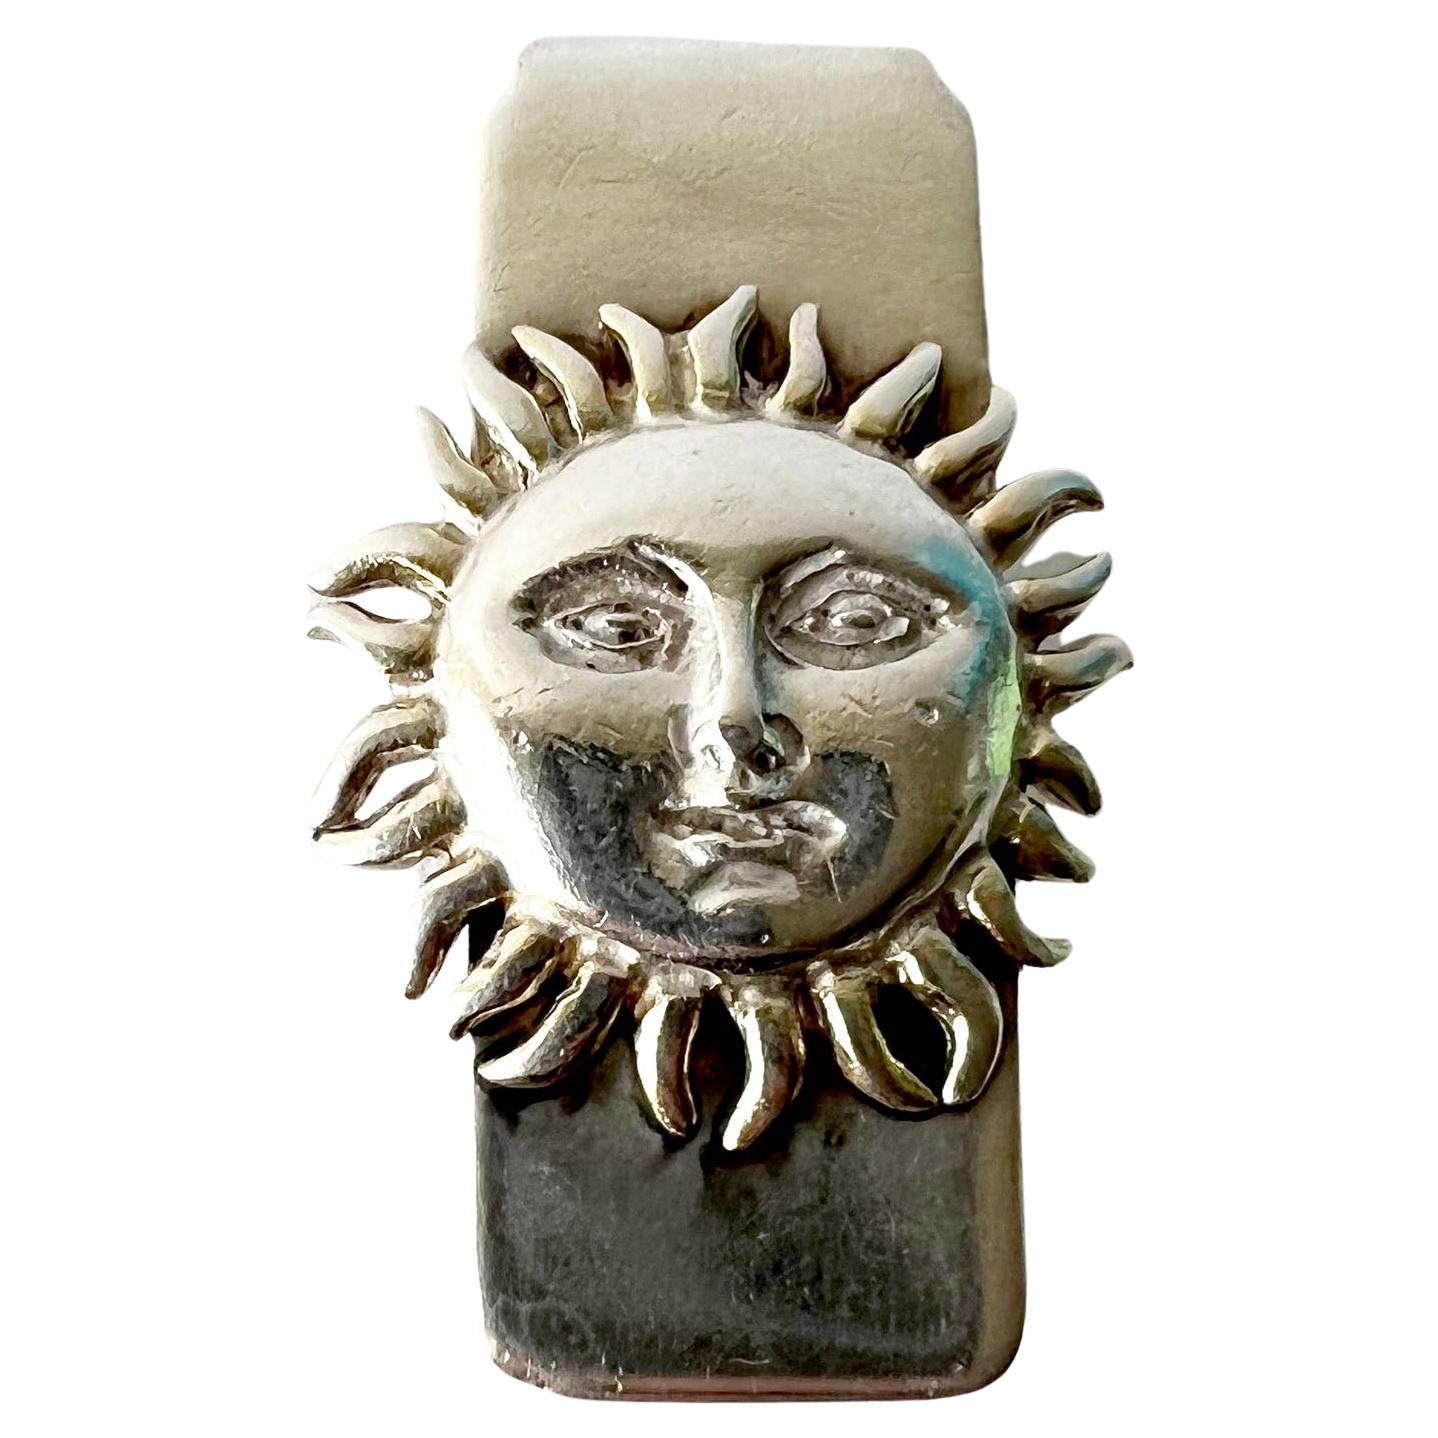 Sterling silver money clip with sun face decoration created by Sergio Bustamante of Mexico. Clip measures 2